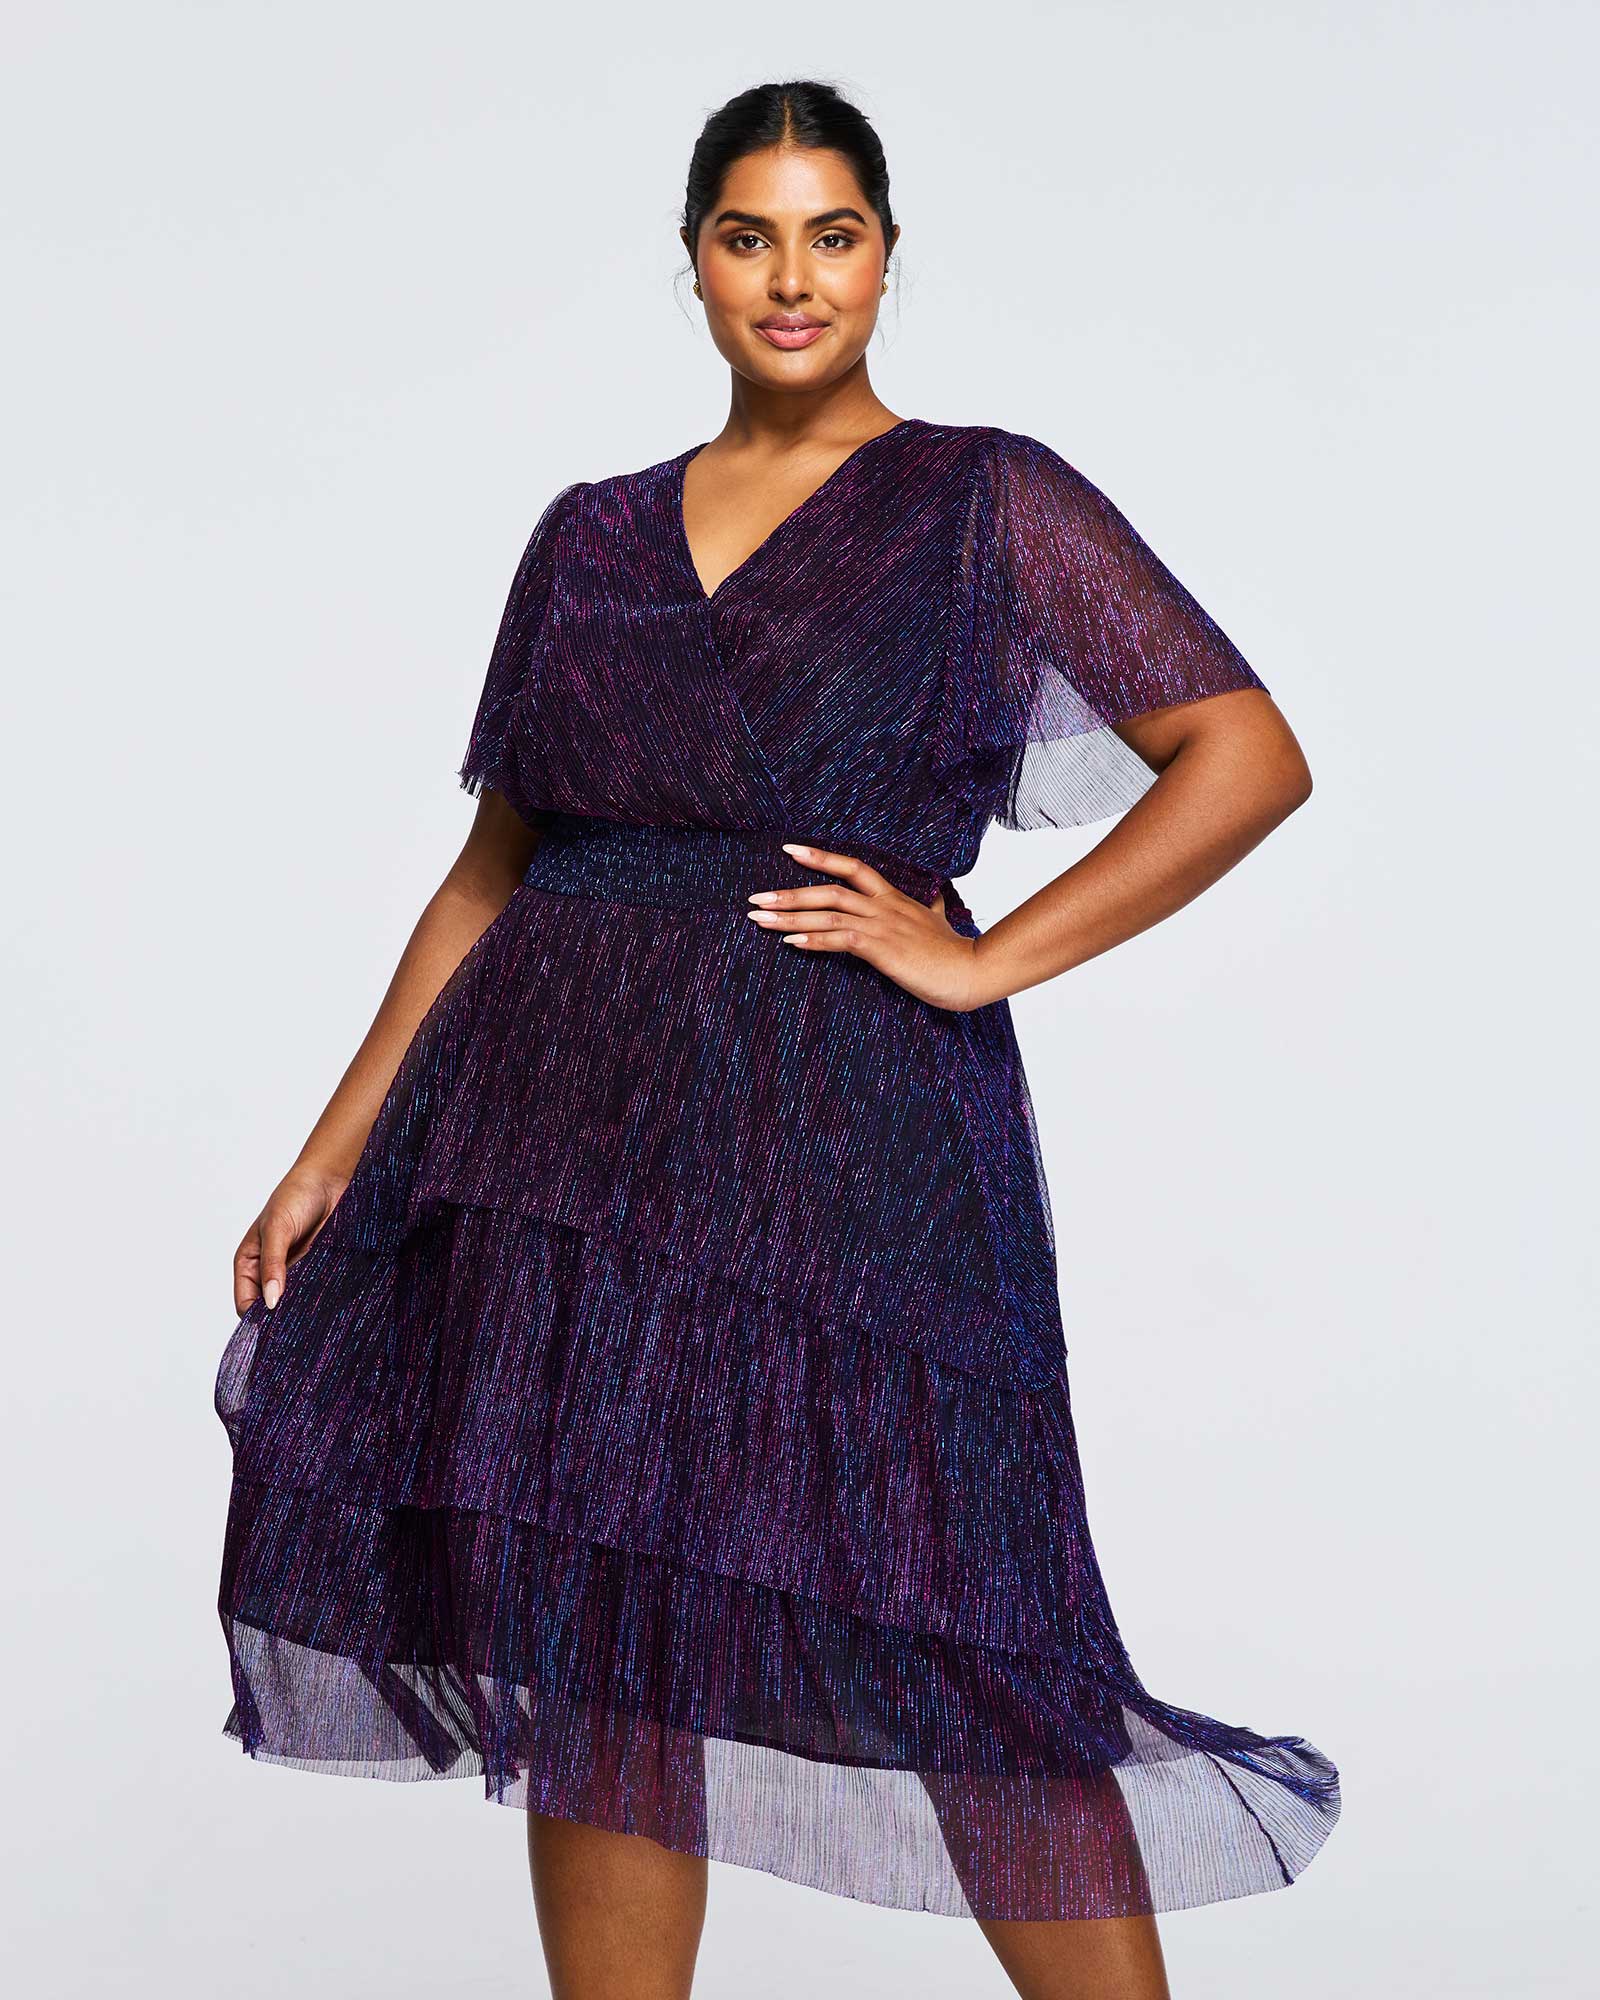 A plus size woman is posing in the Glitterland Metallic Sparkly Midi Dress.